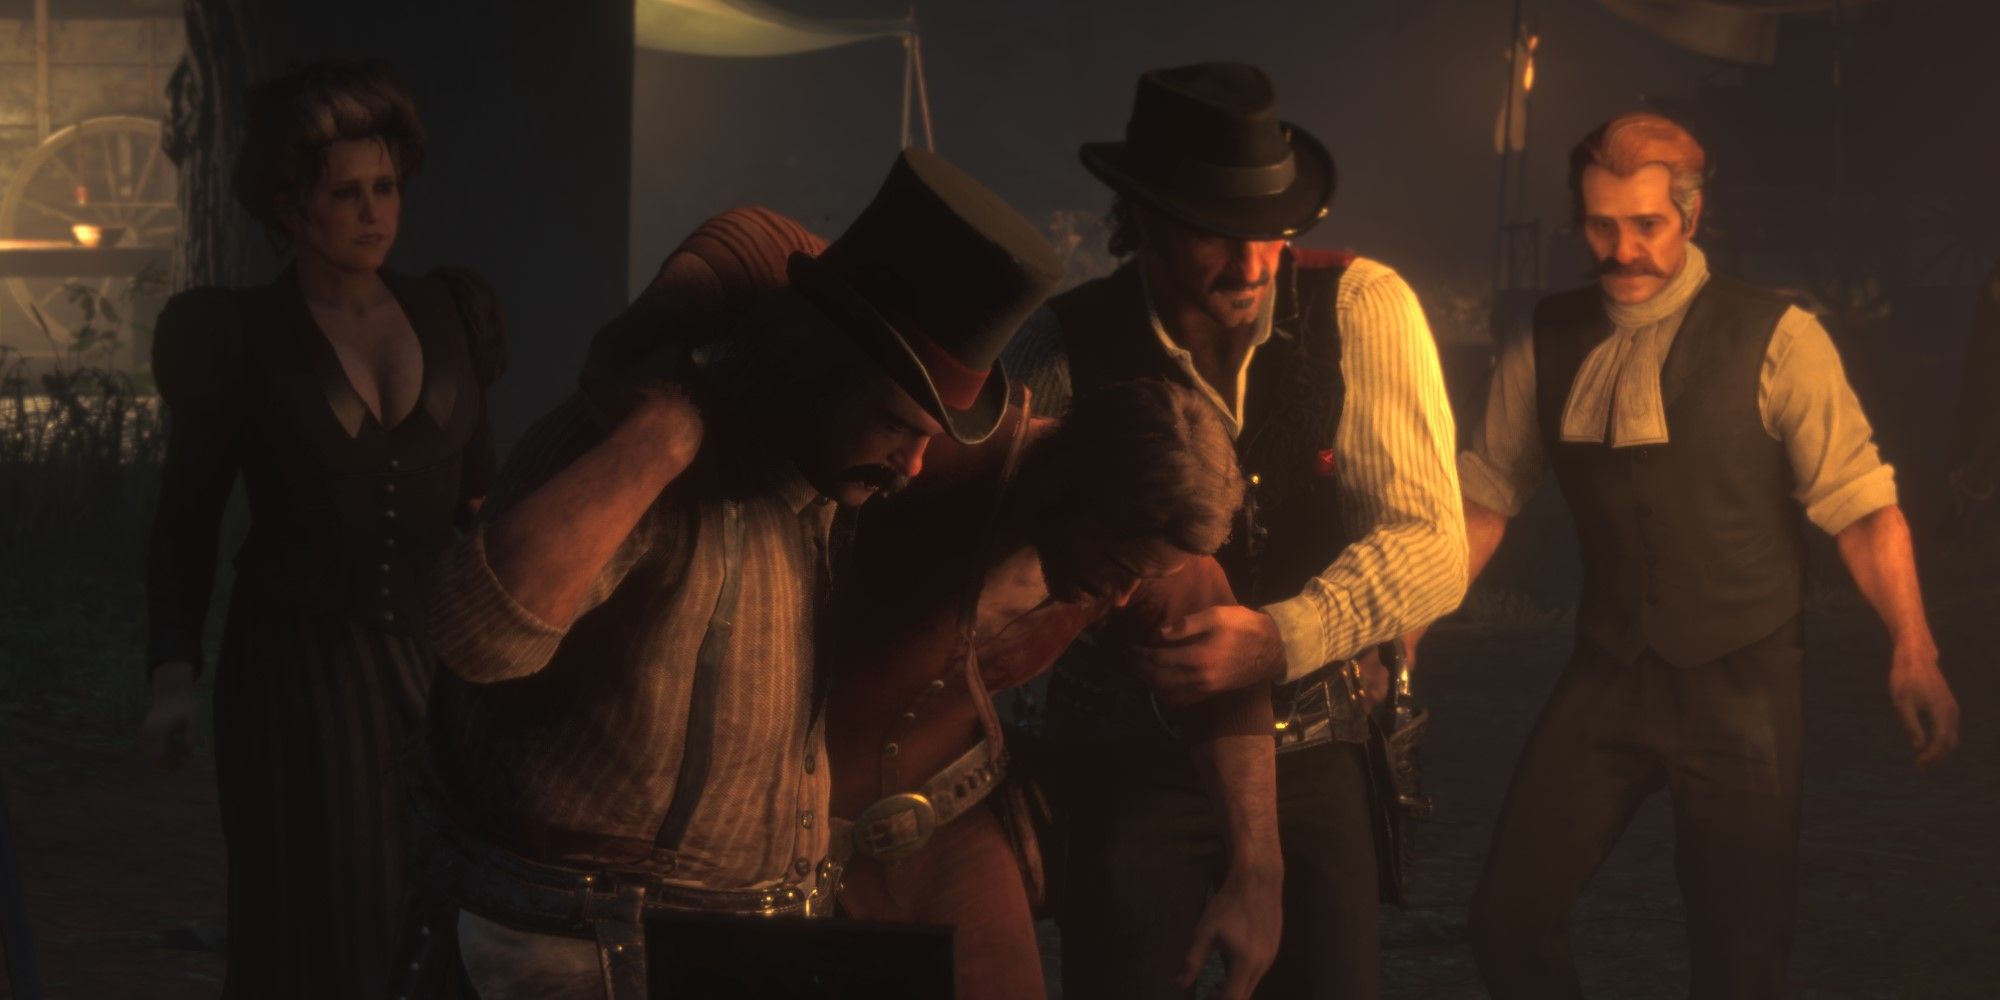 Red Dead Redemption 2 Blessed Are The Peacemakers Ending Cutscene wounded Arthur carried by Pearson and Dutch